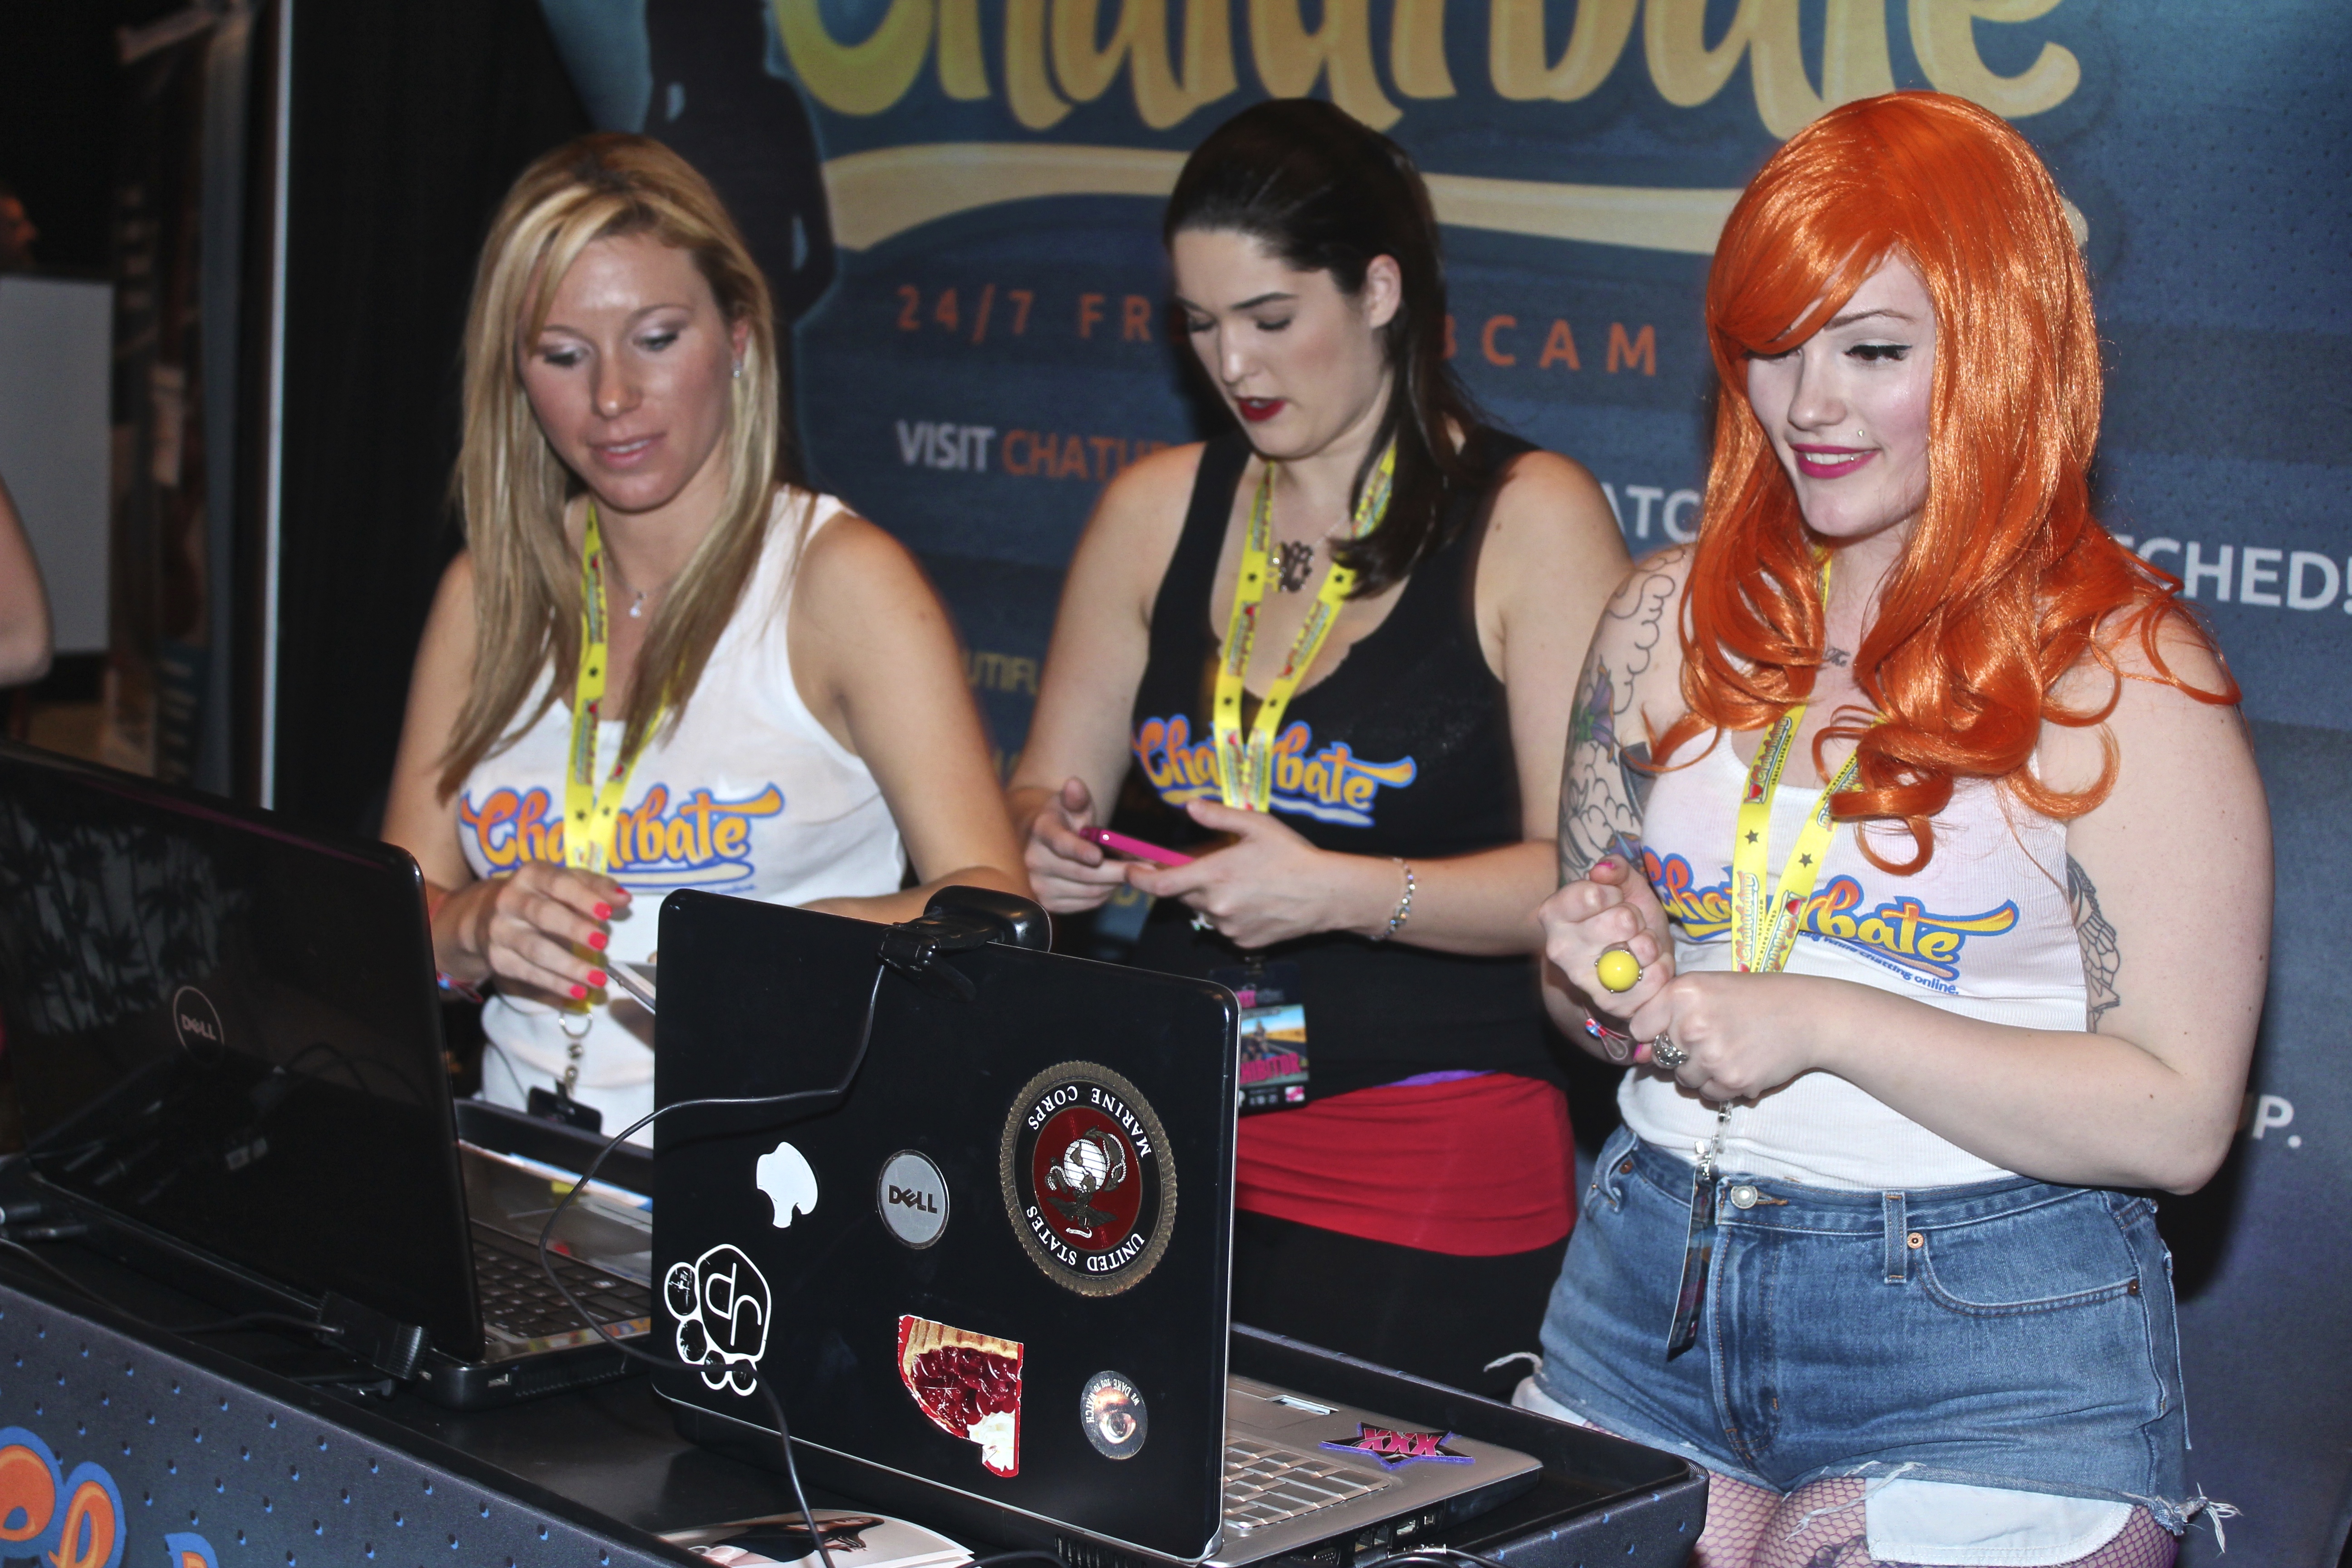 File:Exxxotica AC 2013 . Chaturbate Booth (8672489083).jpg - Wikimedia Commons